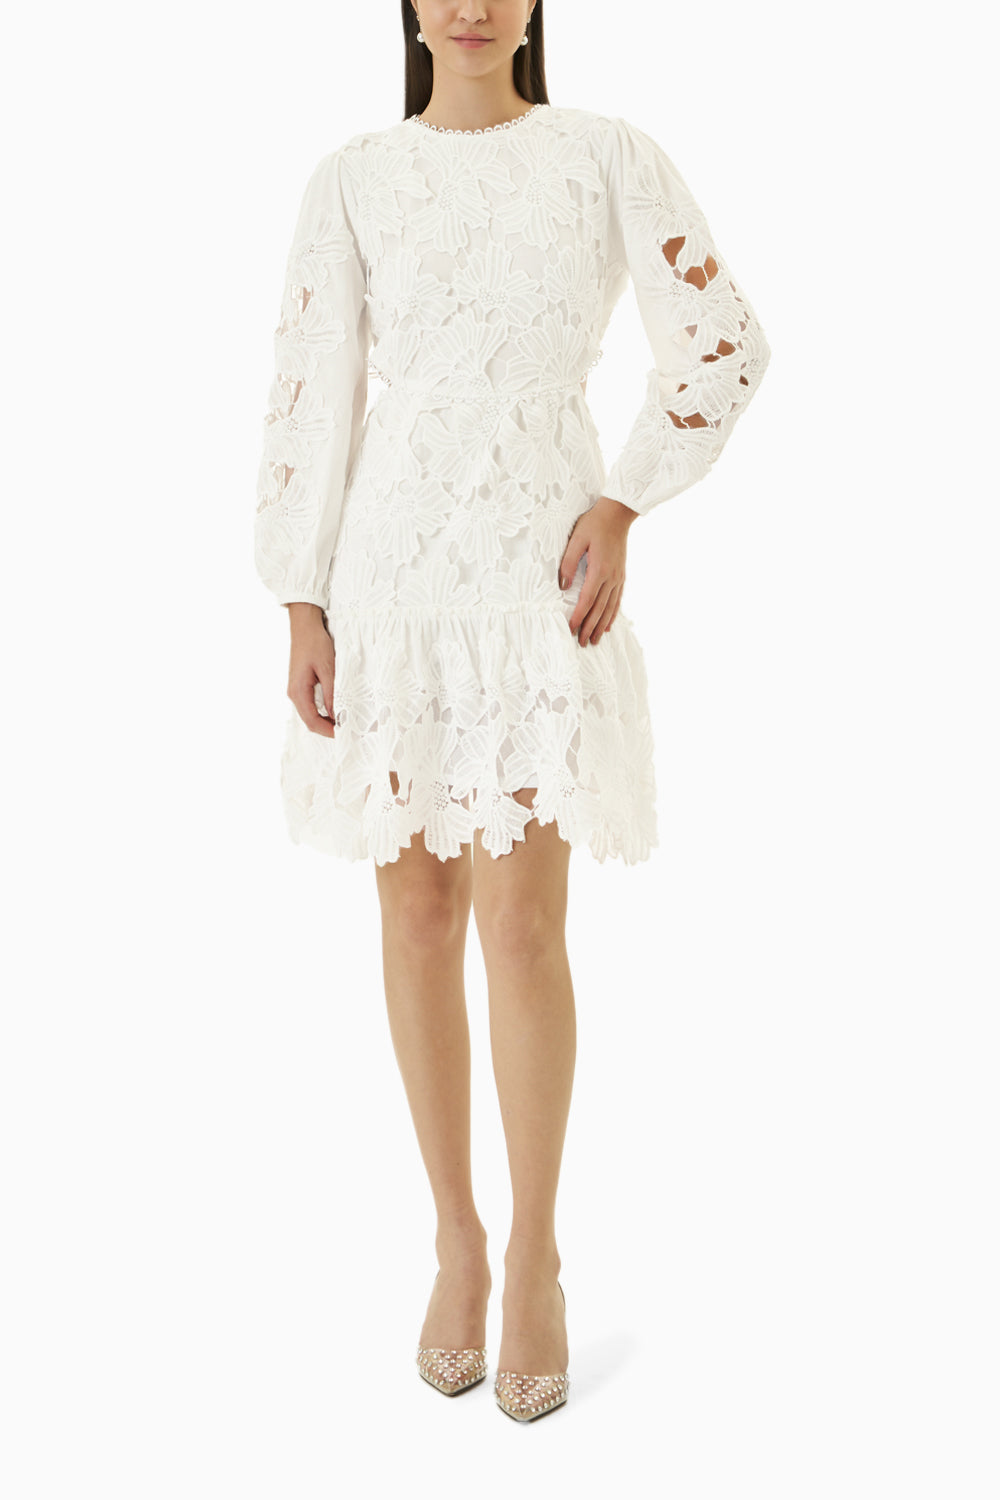 The Sommerset Lace Dress